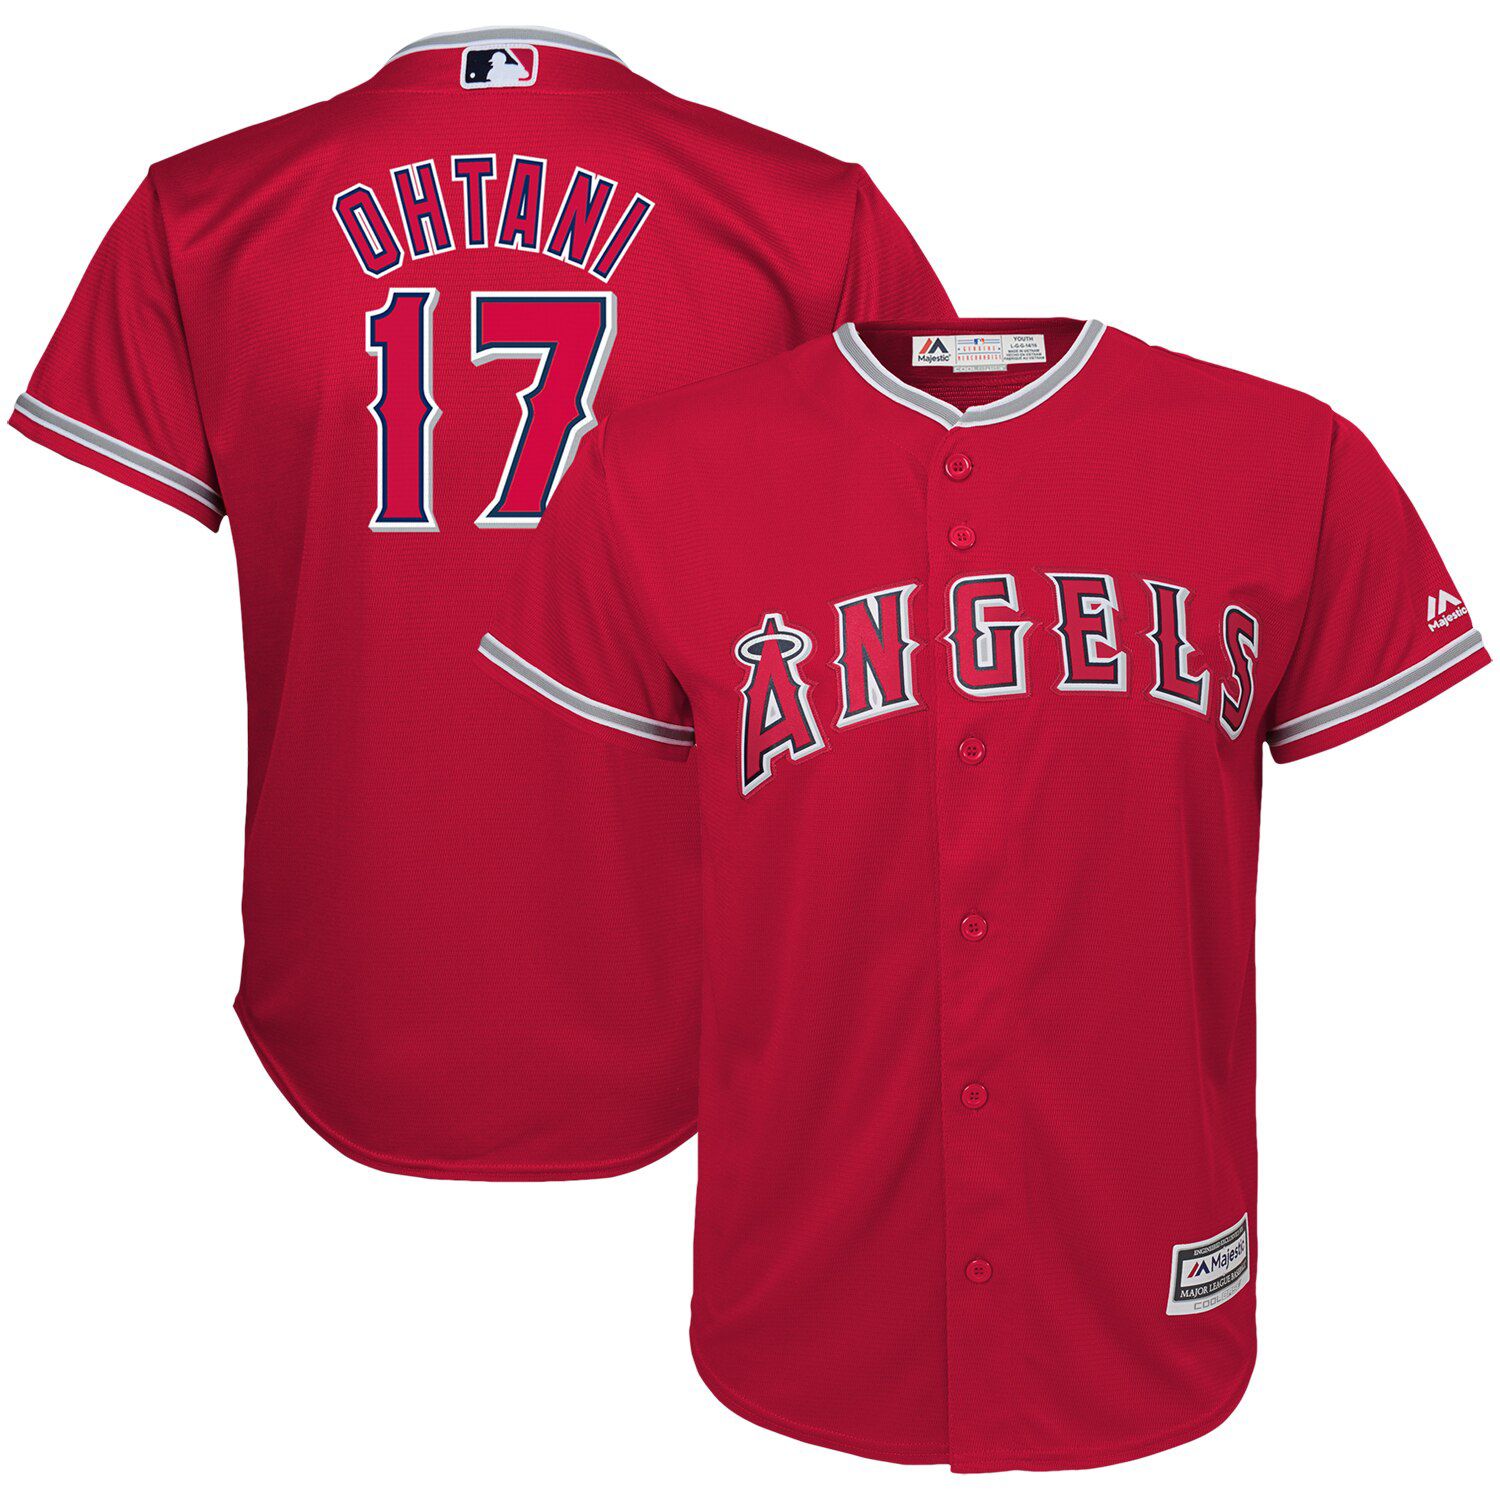 mike trout youth jersey